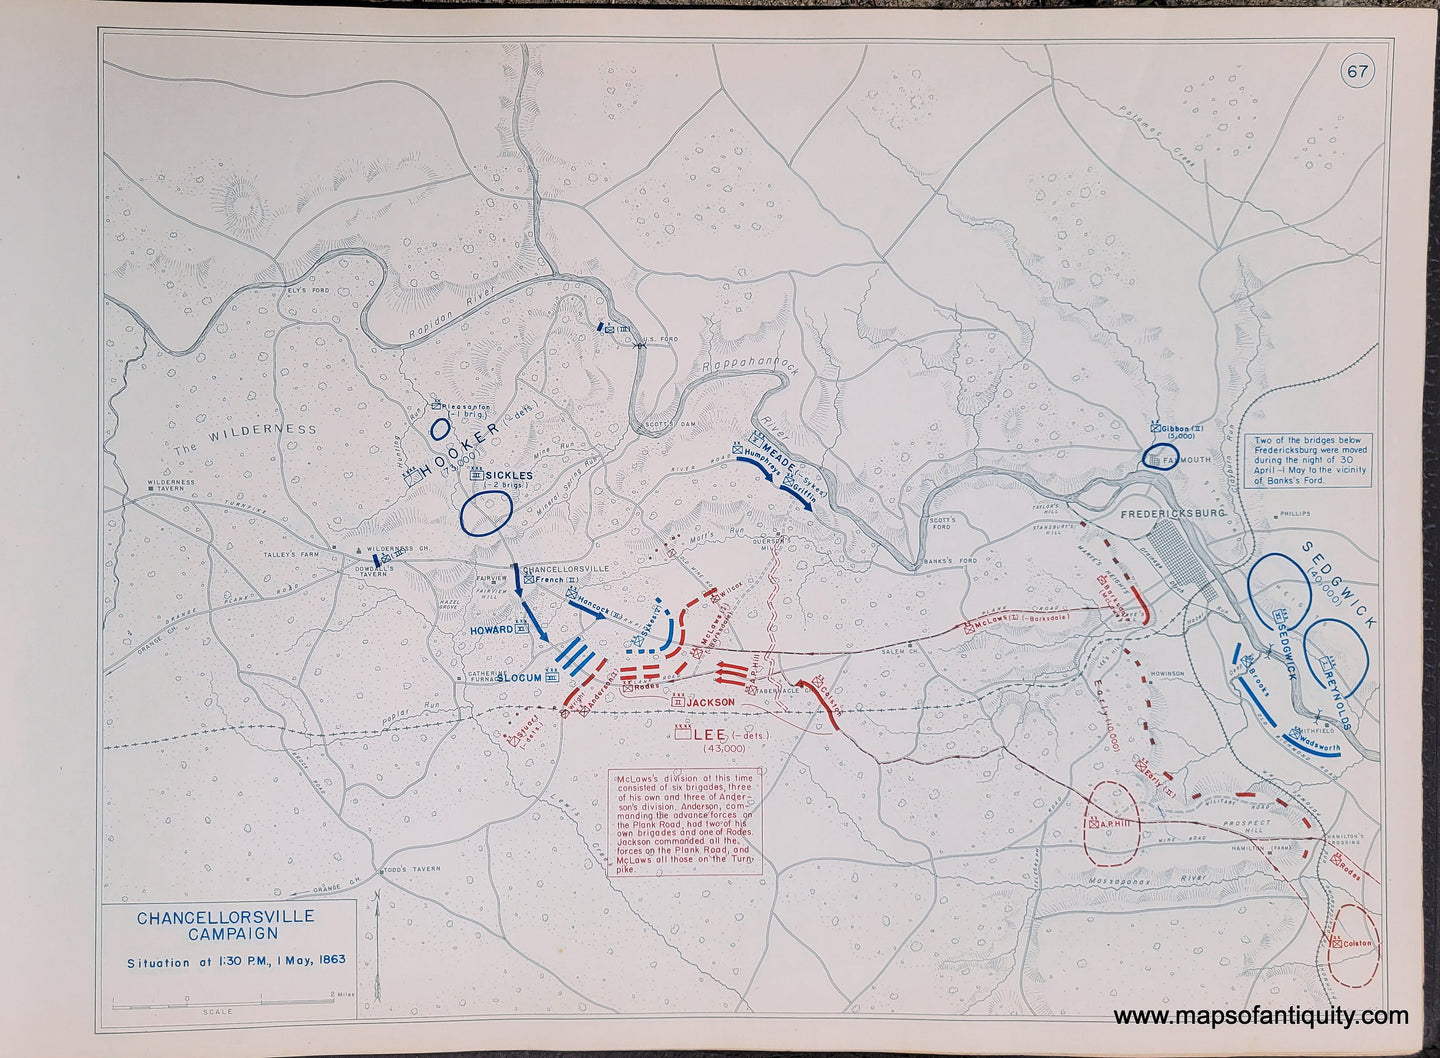 Genuine-Antique-Map-Chancellorsville-Campaign-Situation-at-1-30-PM-1-May-1863-1948-Matthew-Forney-Steele-Dept-of-Military-Art-and-Engineering-US-Military-Academy-West-Point-Maps-Of-Antiquity